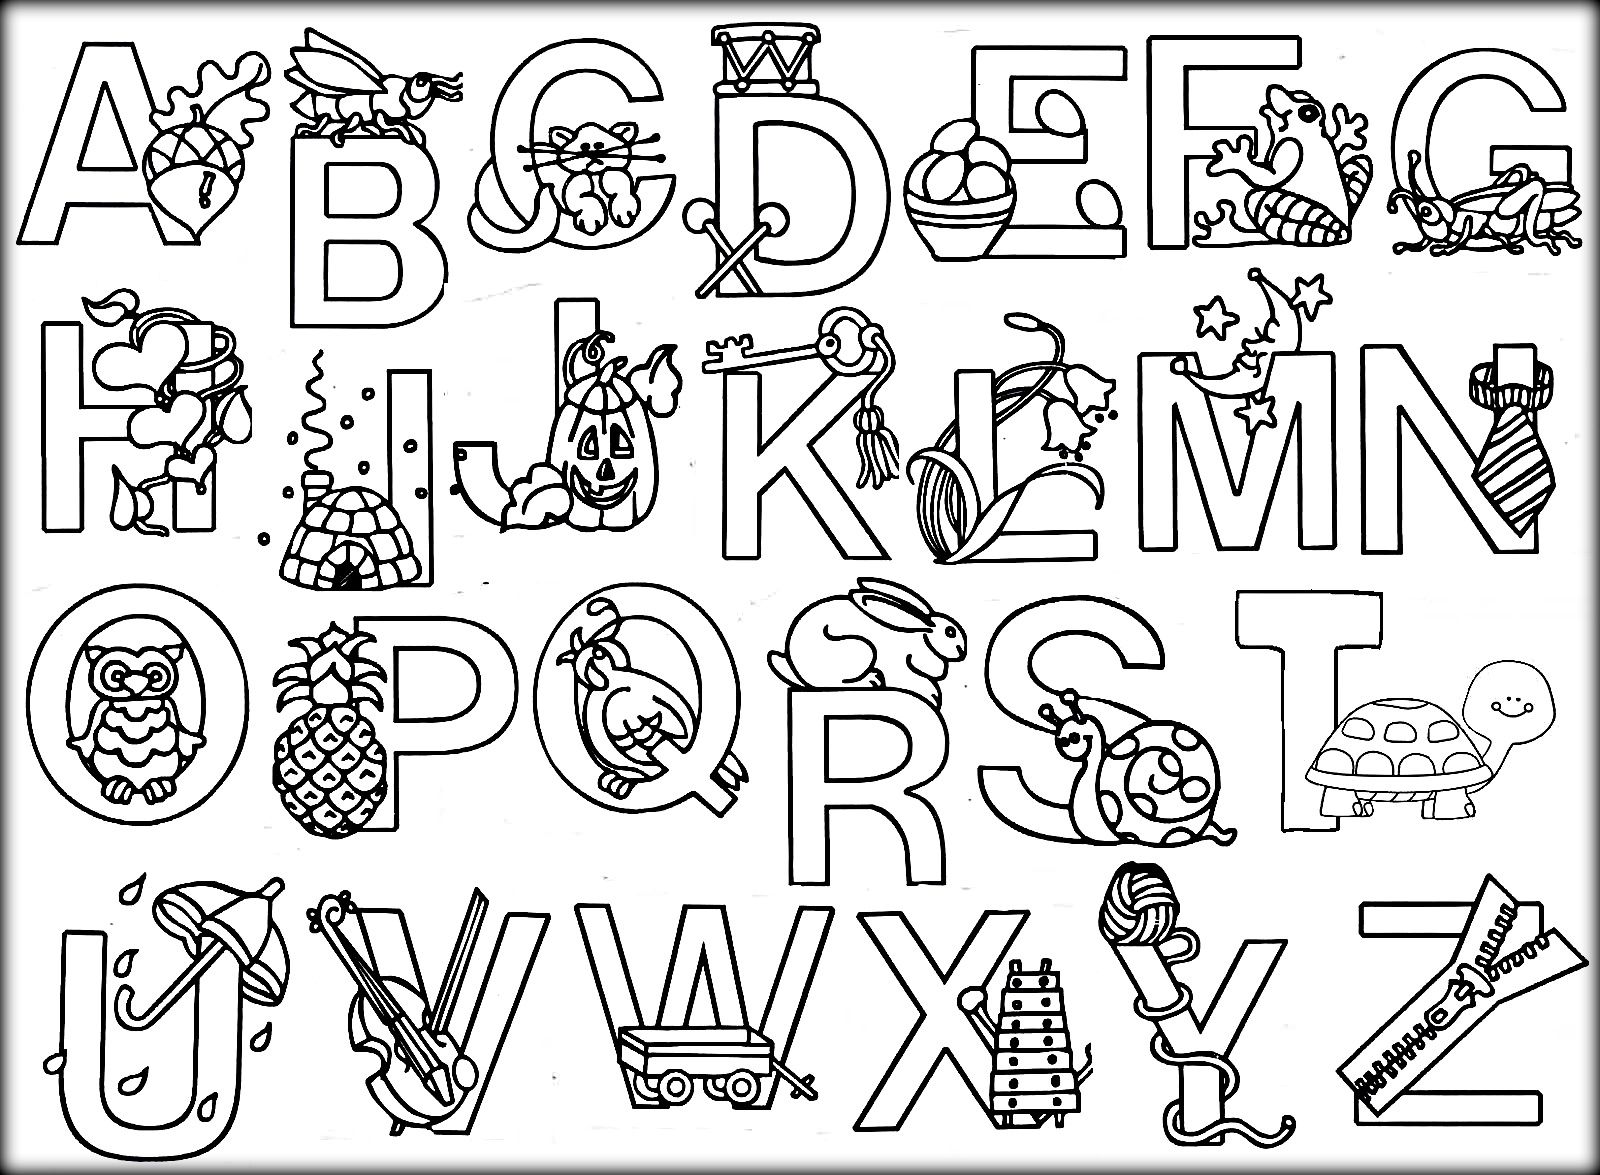 Alphabet Colouring Page #22784 - Free Printable Alphabet Coloring Pages